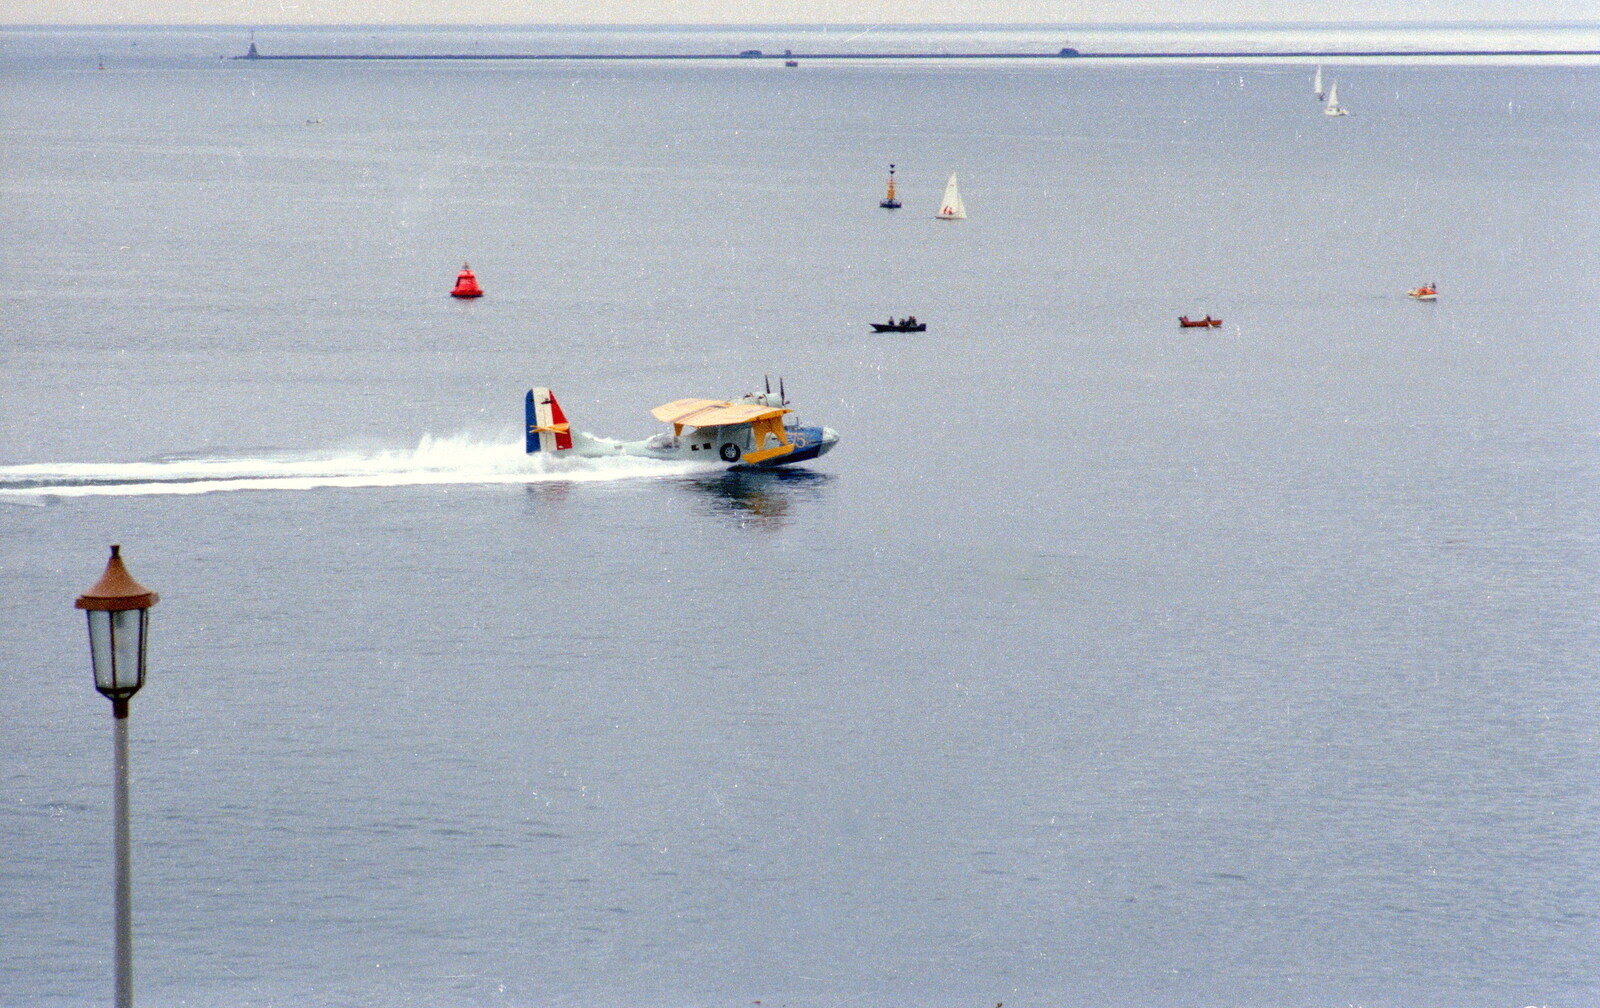 Uni: The Navy-Curtiss NC-4 Trans-Atlantic Flight, Plymouth Sound - 31st May 1986: The Catalina churns up the water as it speeds along